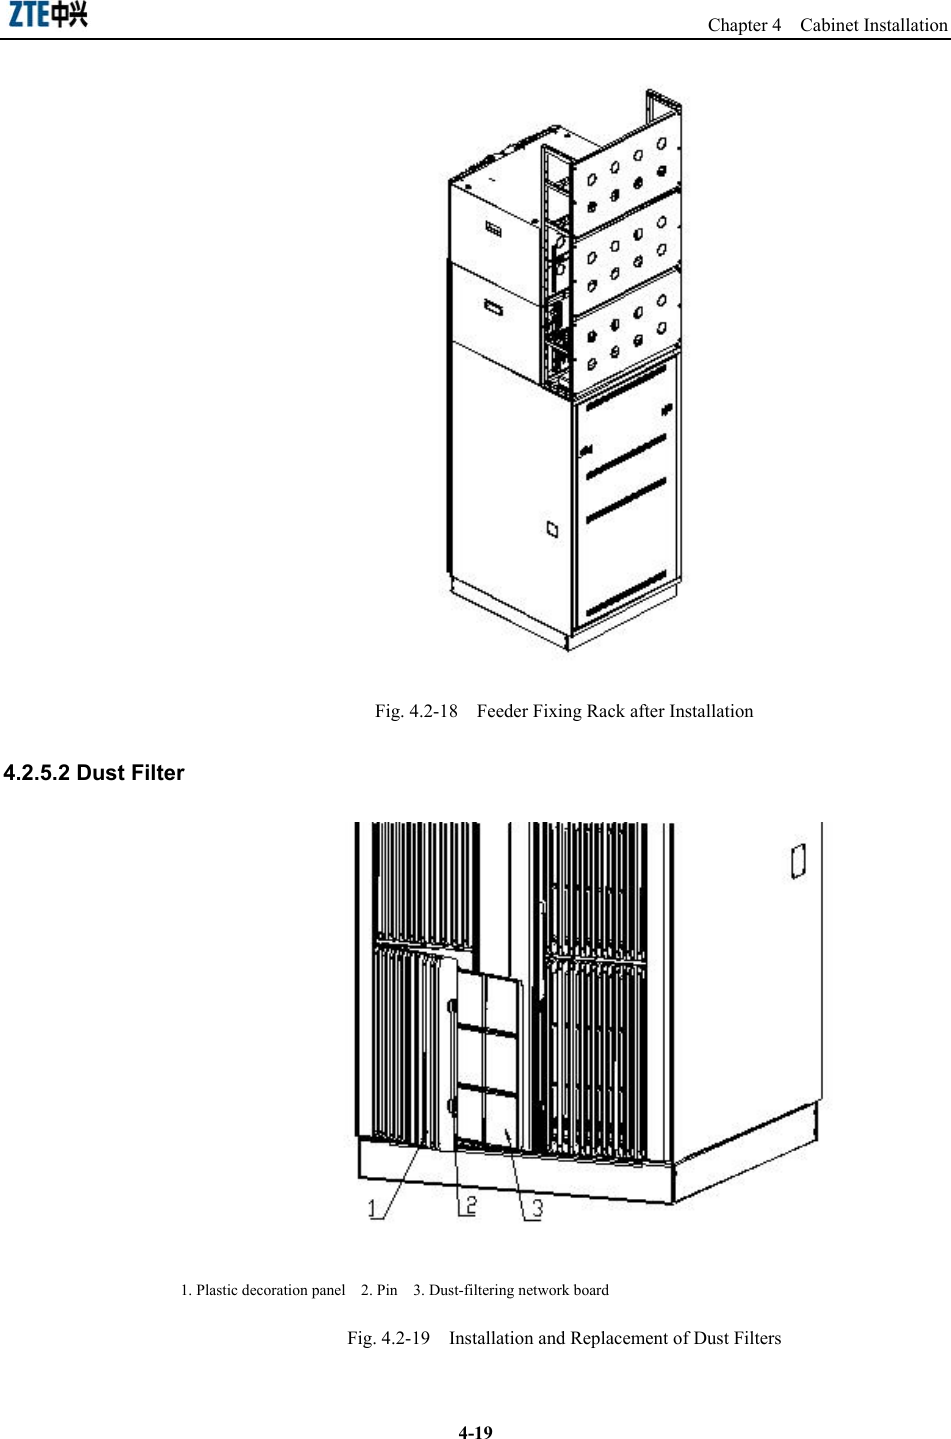                                                                   Chapter 4  Cabinet Installation  4-19 Fig. 4.2-18    Feeder Fixing Rack after Installation 4.2.5.2 Dust Filter  1. Plastic decoration panel    2. Pin    3. Dust-filtering network board Fig. 4.2-19    Installation and Replacement of Dust Filters   